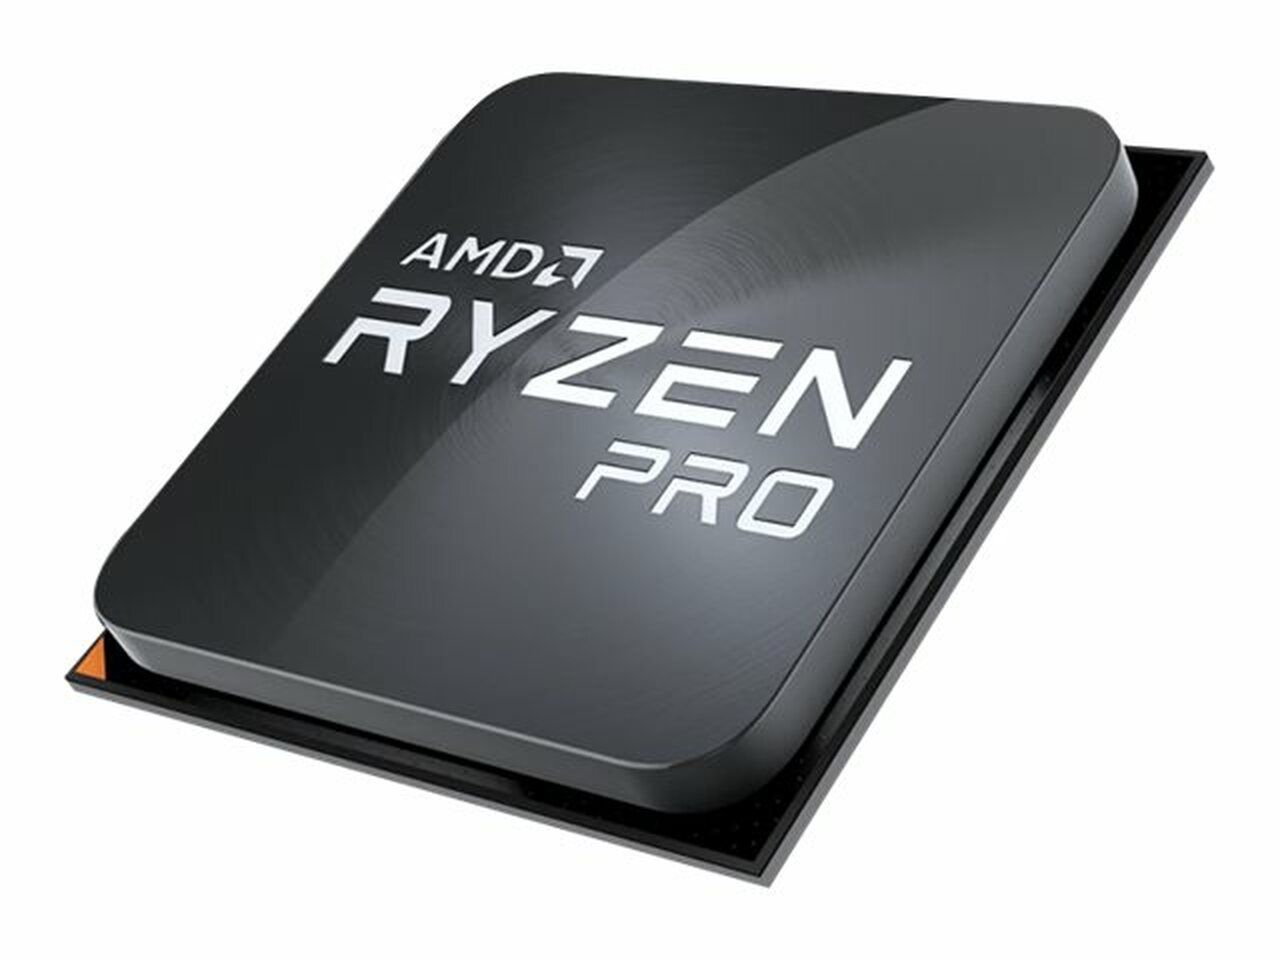 AMD CPU Desktop Ryzen 3 PRO 4C/8T 4350G (4.1GHz Max,6MB,65W,AM4) multipack, with Wraith Stealth cooler_1